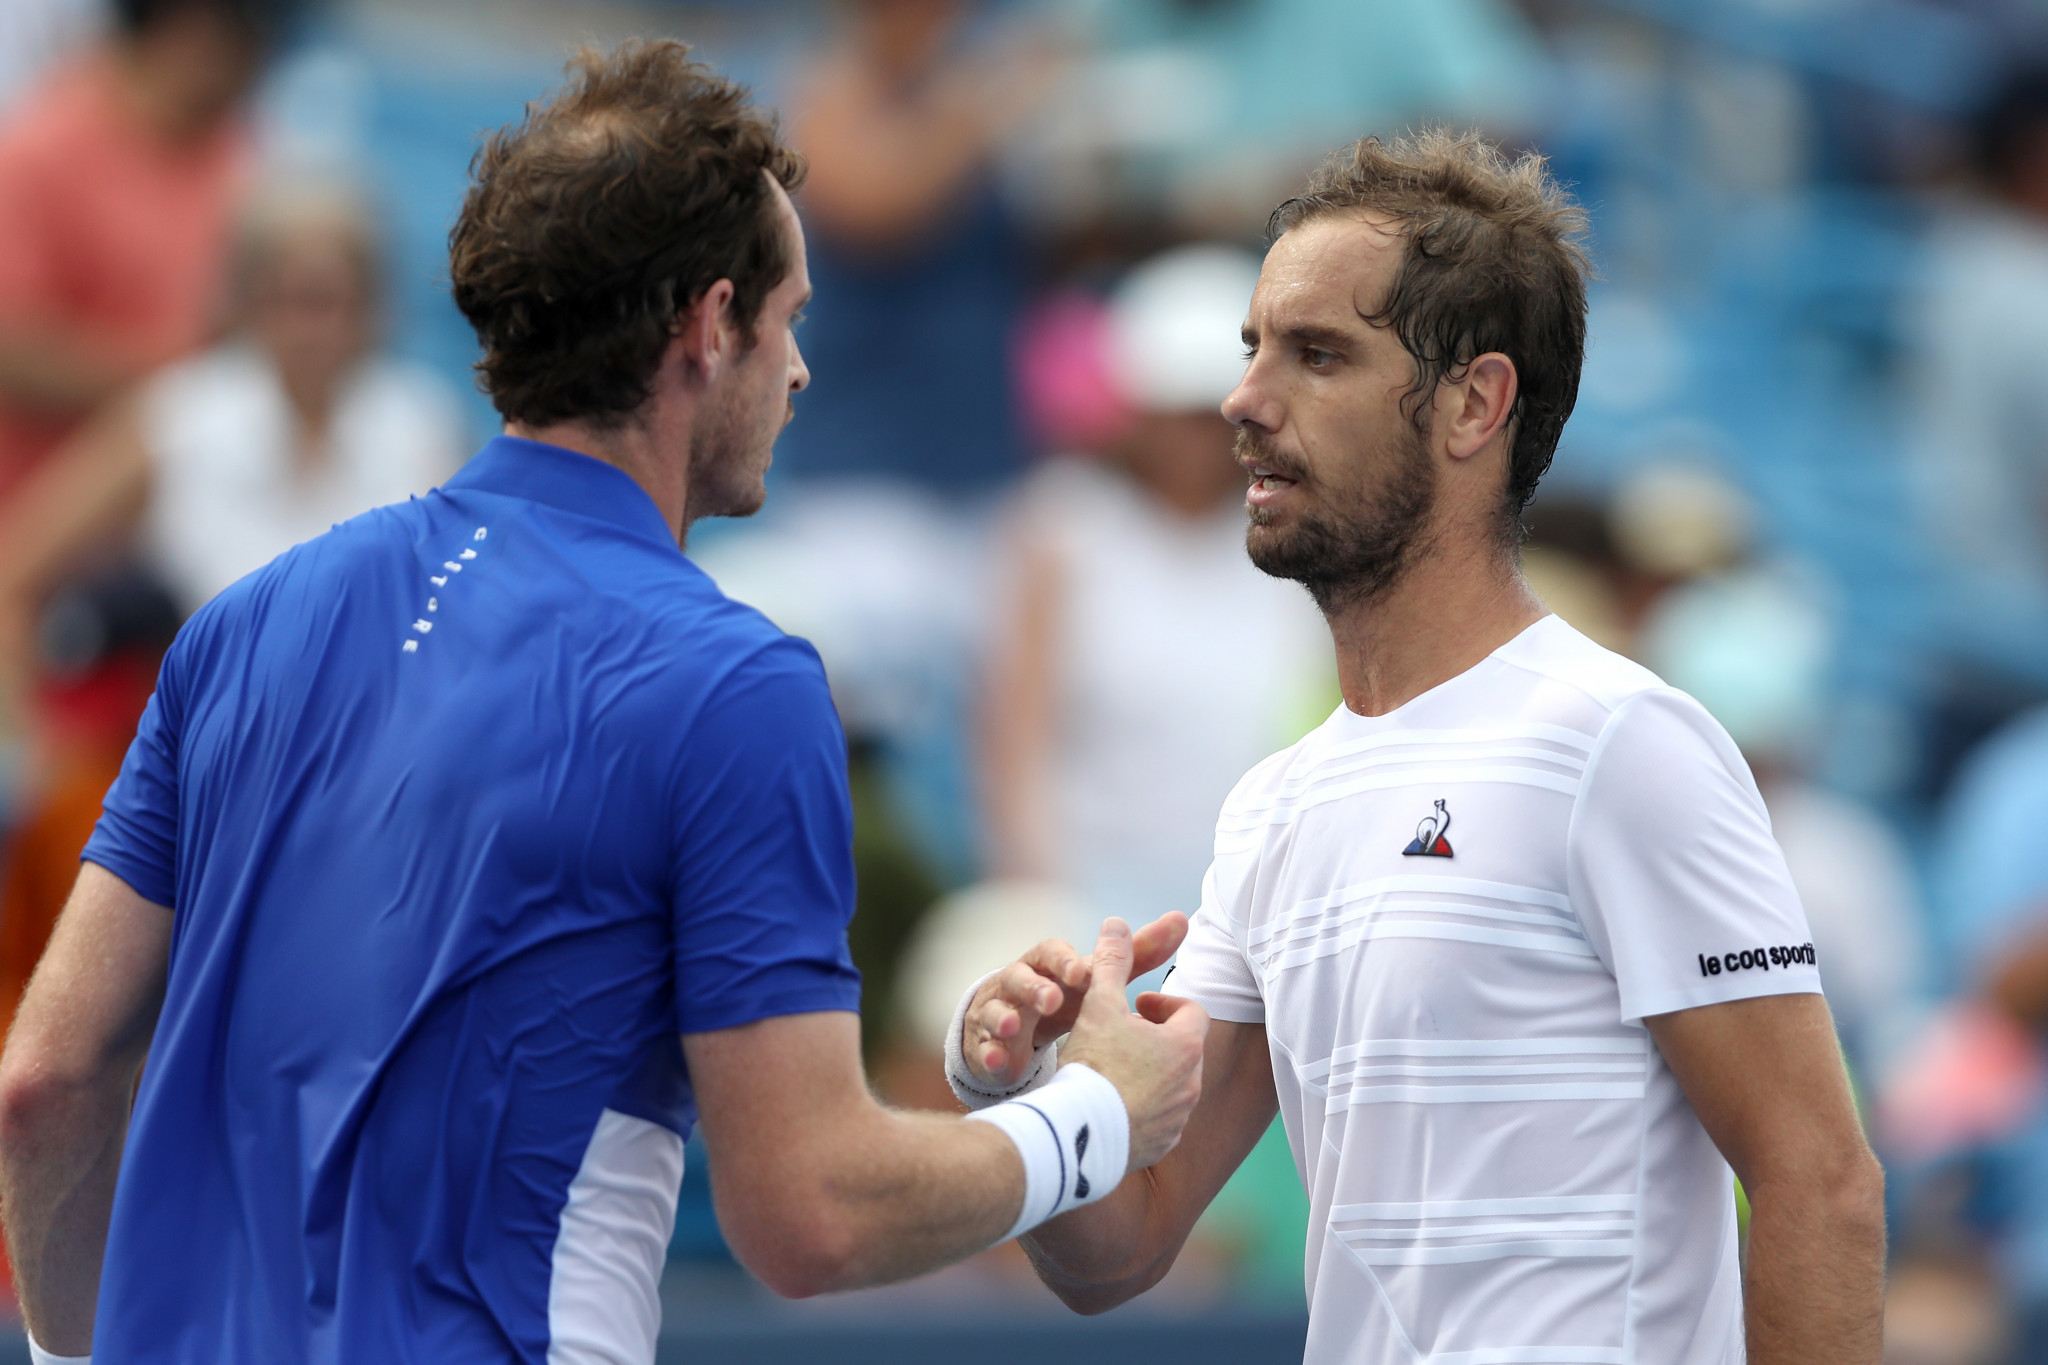 Murray rules out US Open singles after losing to Gasquet in first round of Cincinnati Masters